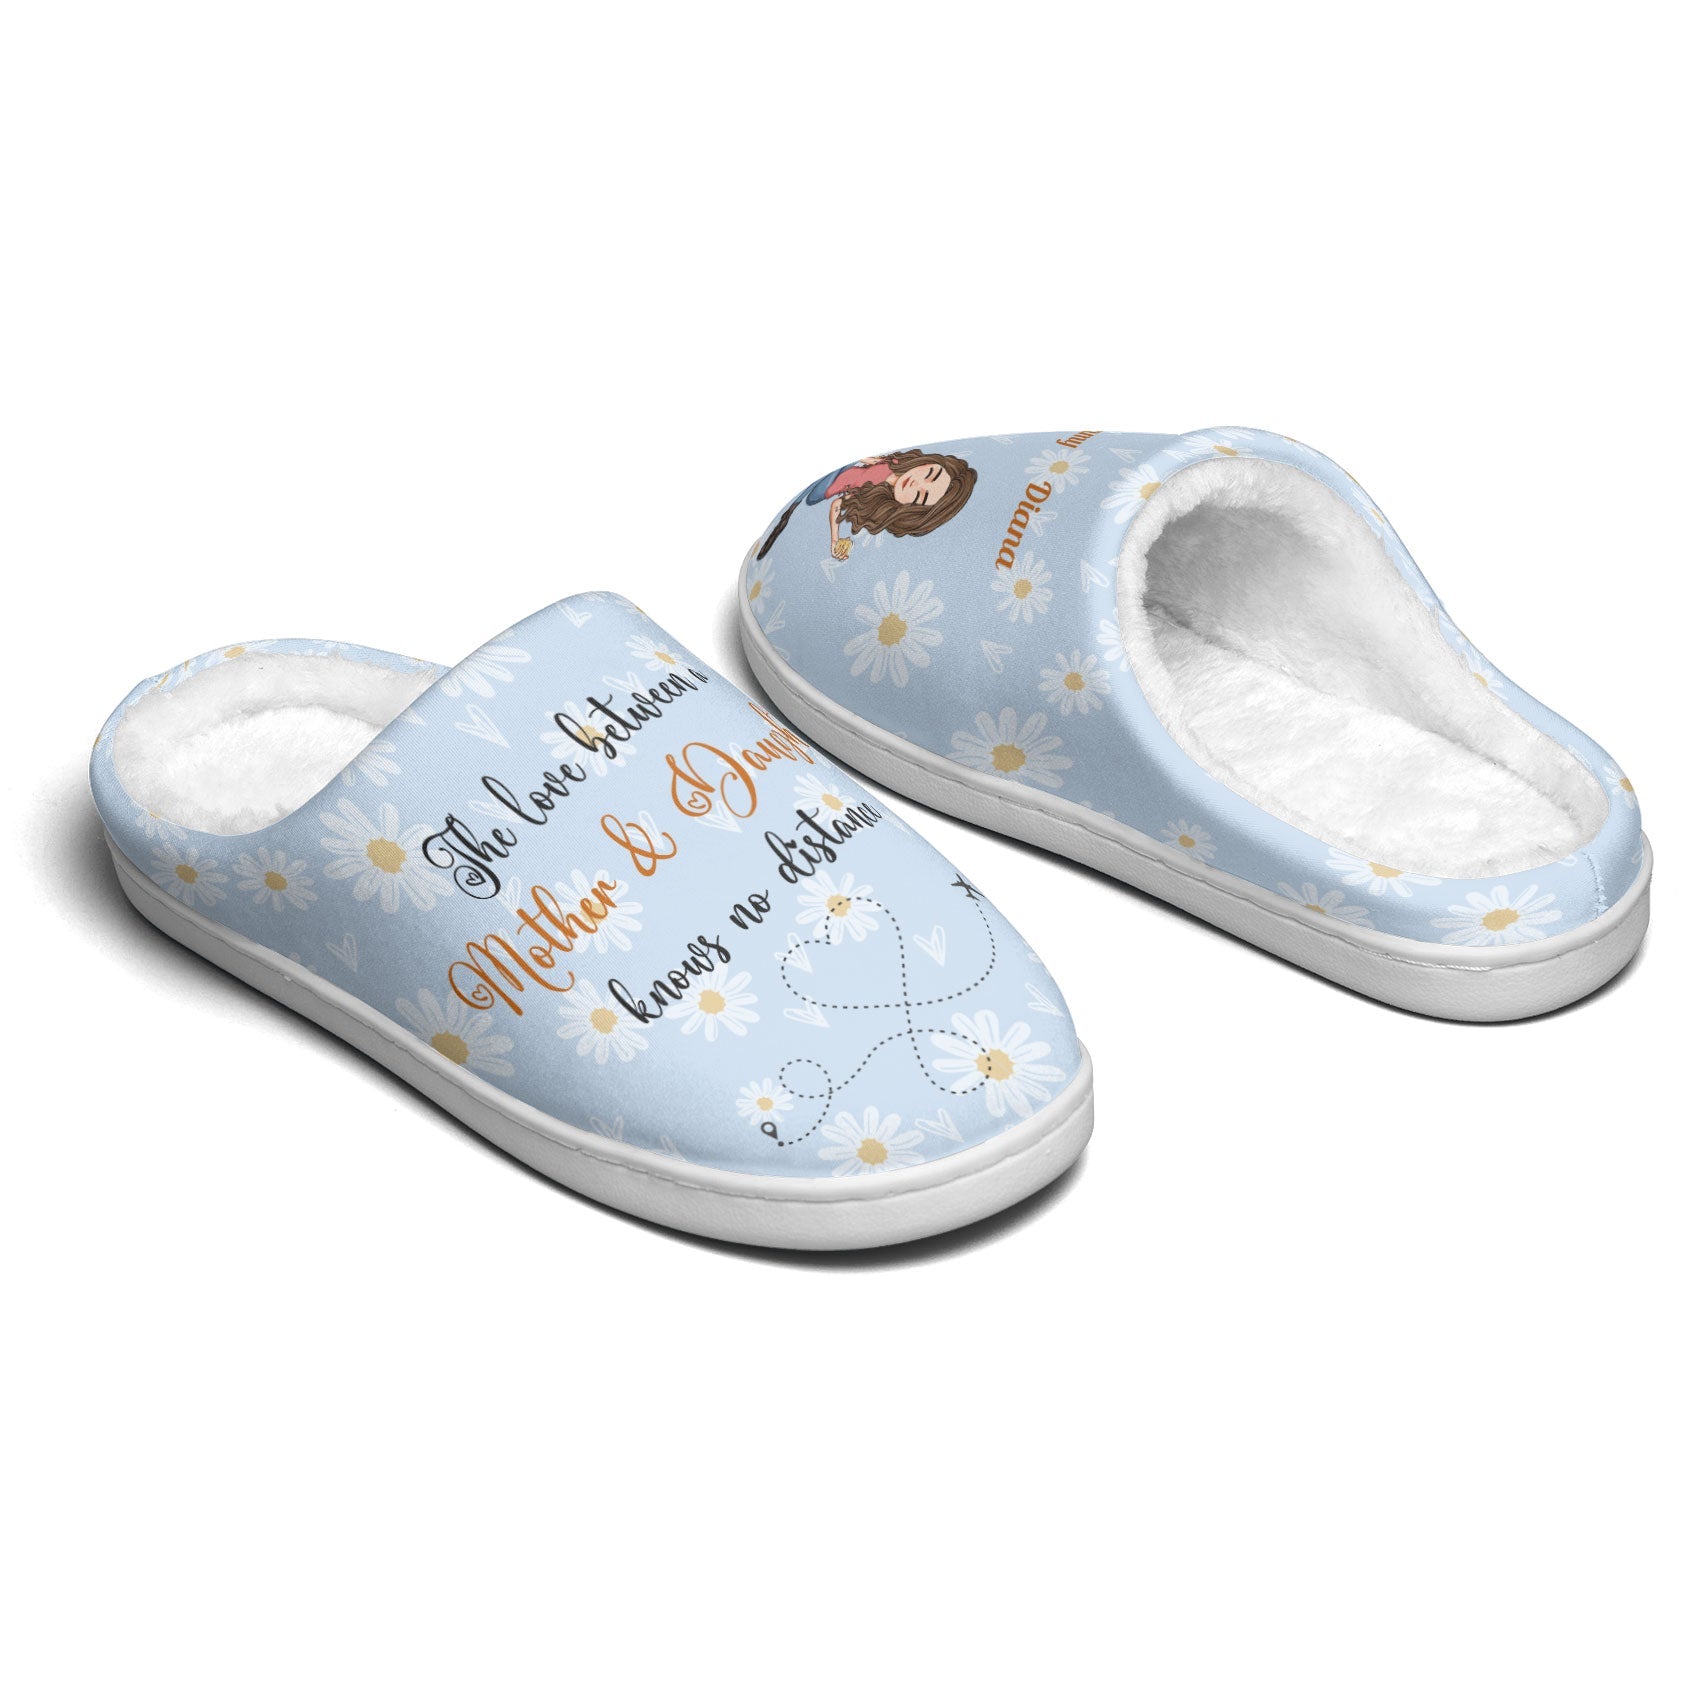 The Love Between A Mother & Children - Personalized Slippers Slippers / for Men / US14(EU48)